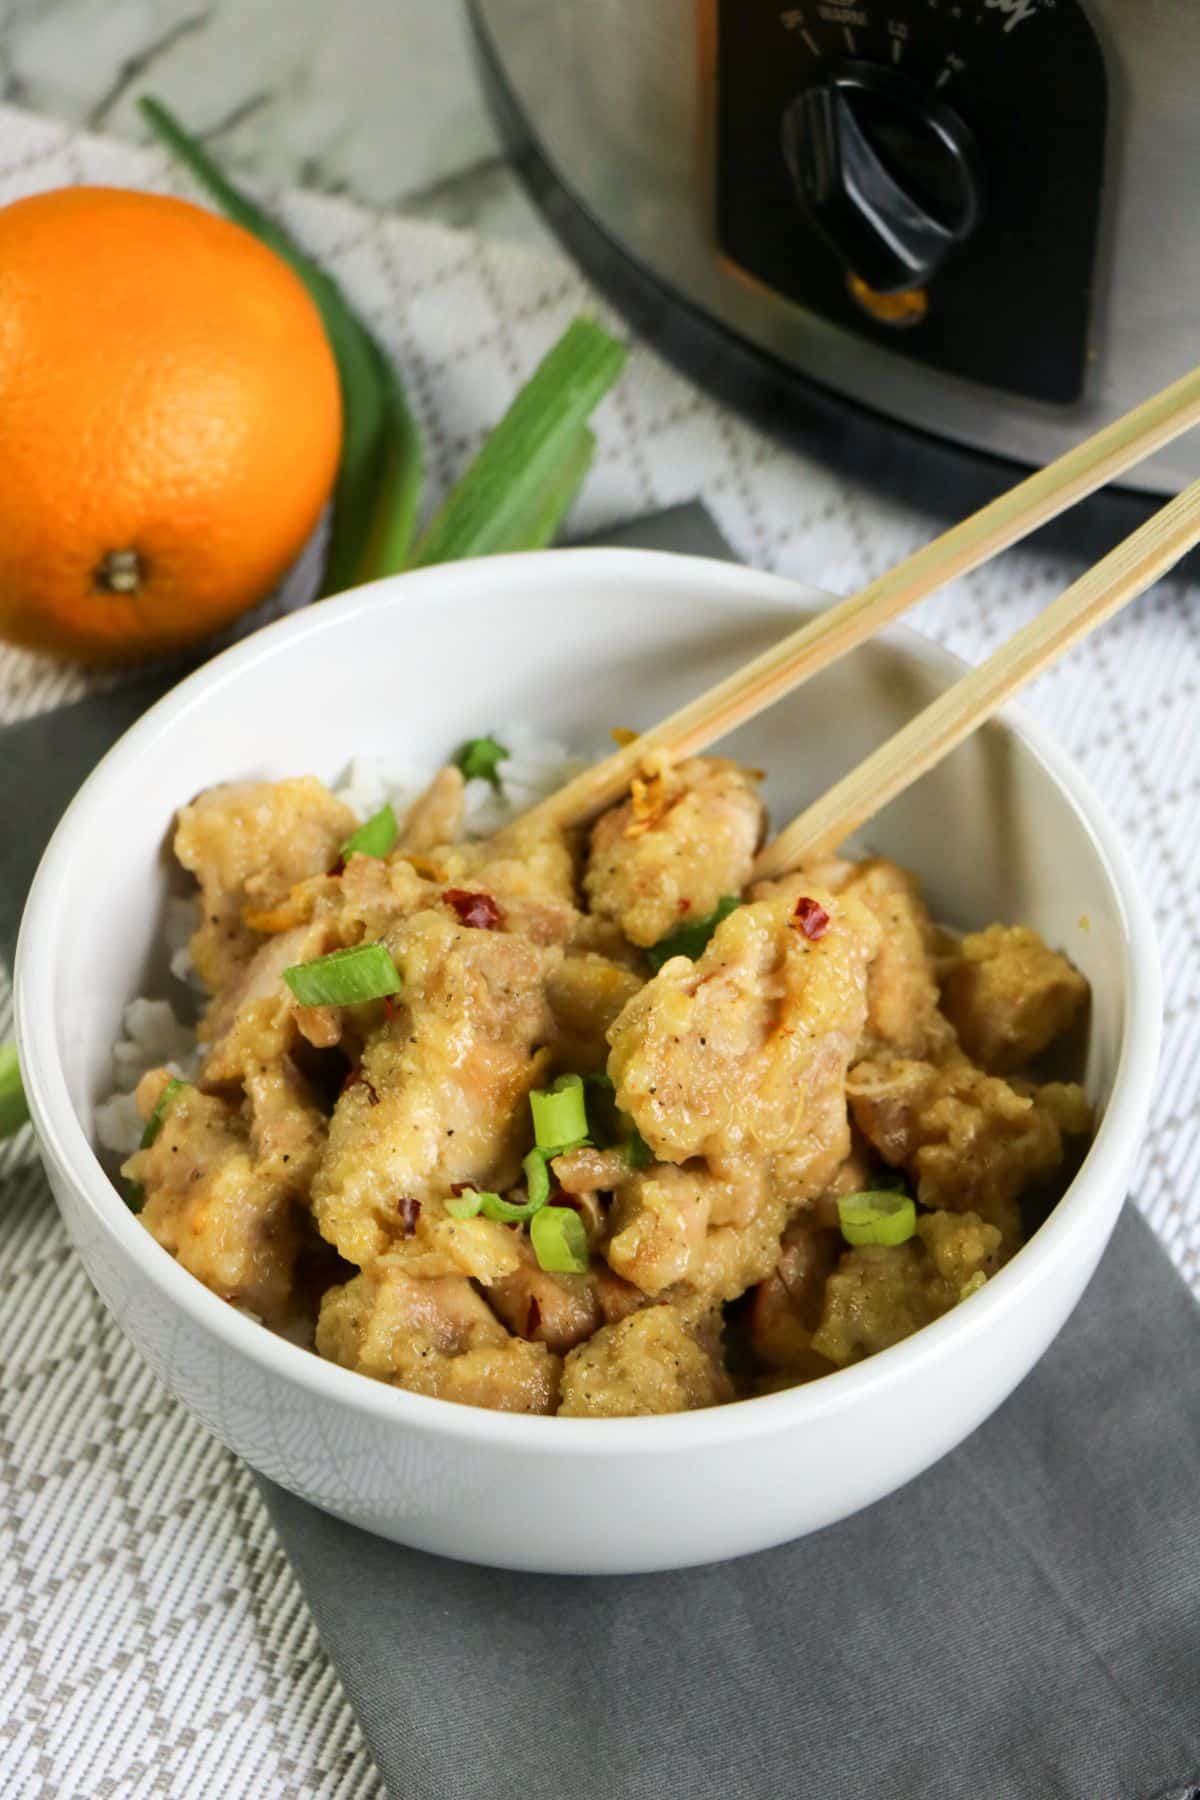 Crockpot Orange Chicken and wooden chopsticks in a white bowl with an orange, green onions, and a crockpot in the background